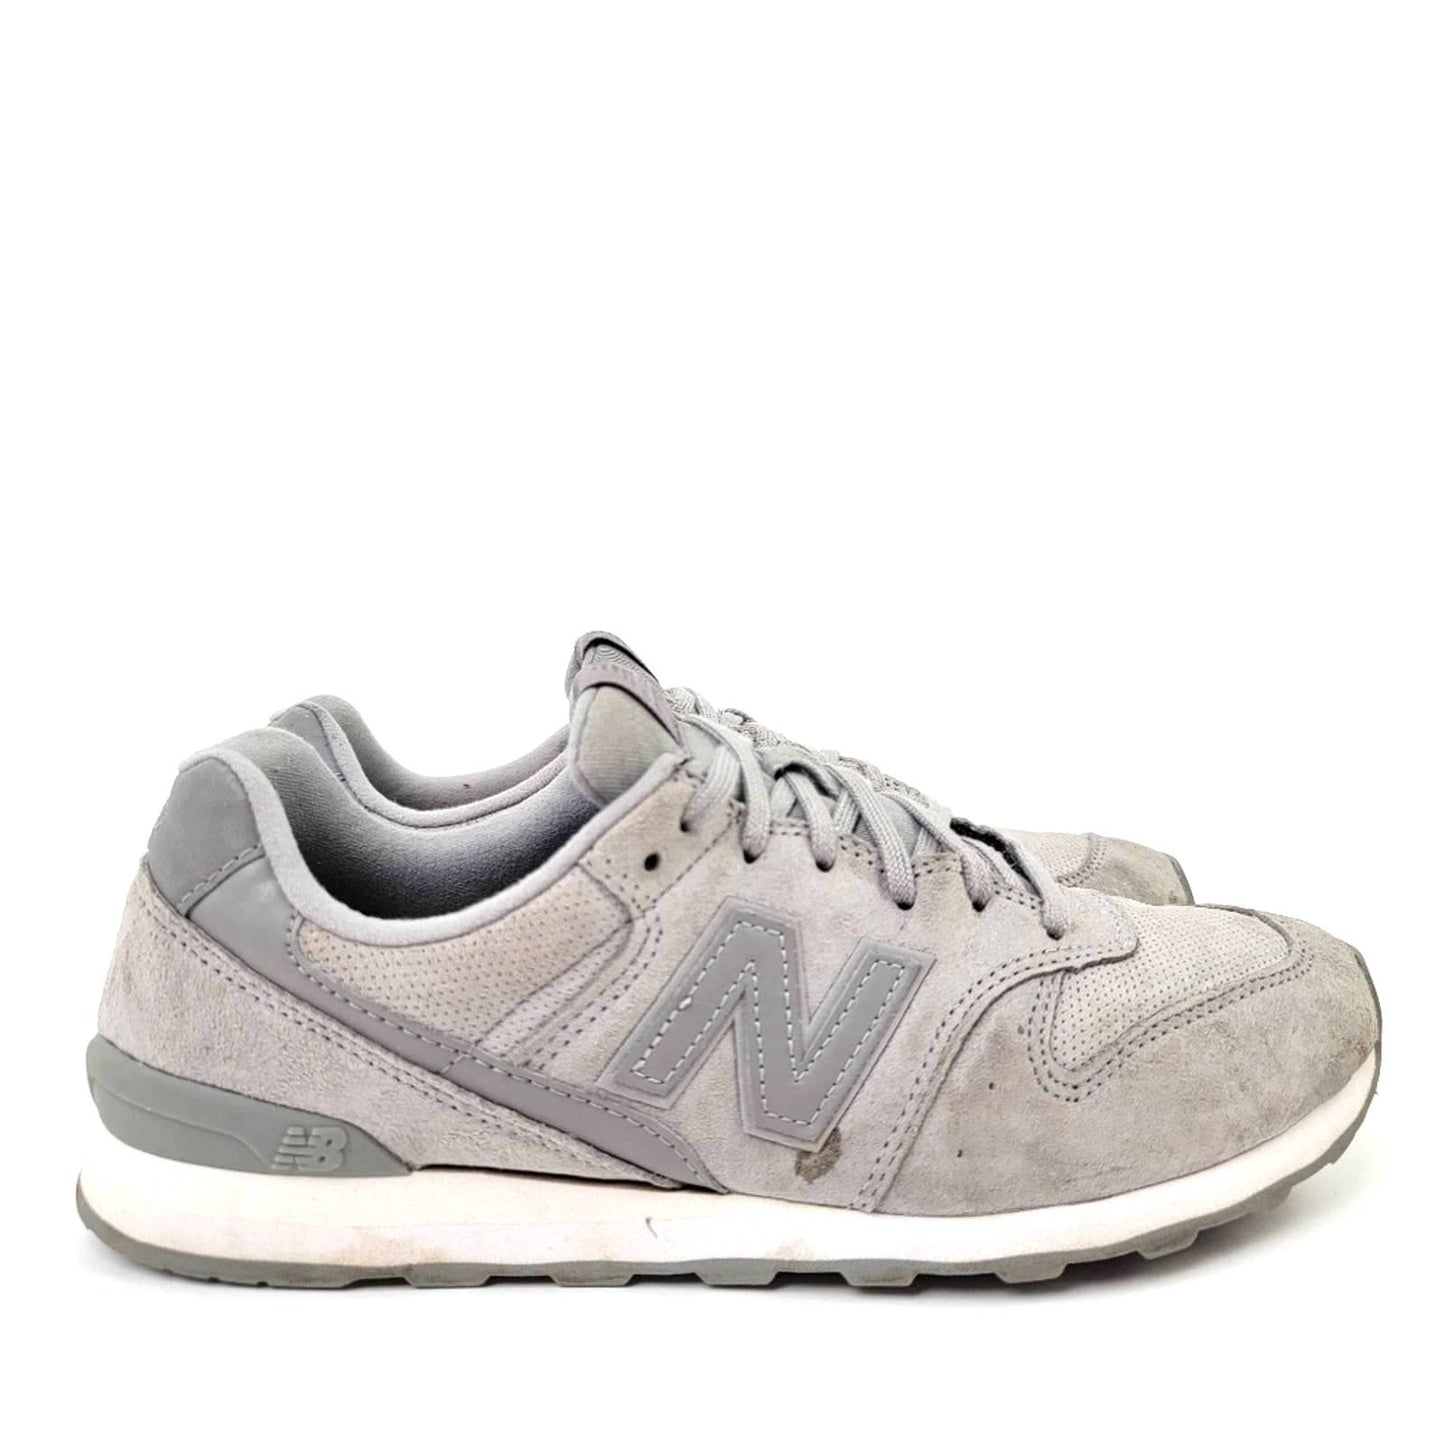 New Balance 696 Suede Comfort Athletic Tennis Shoes - 8.5